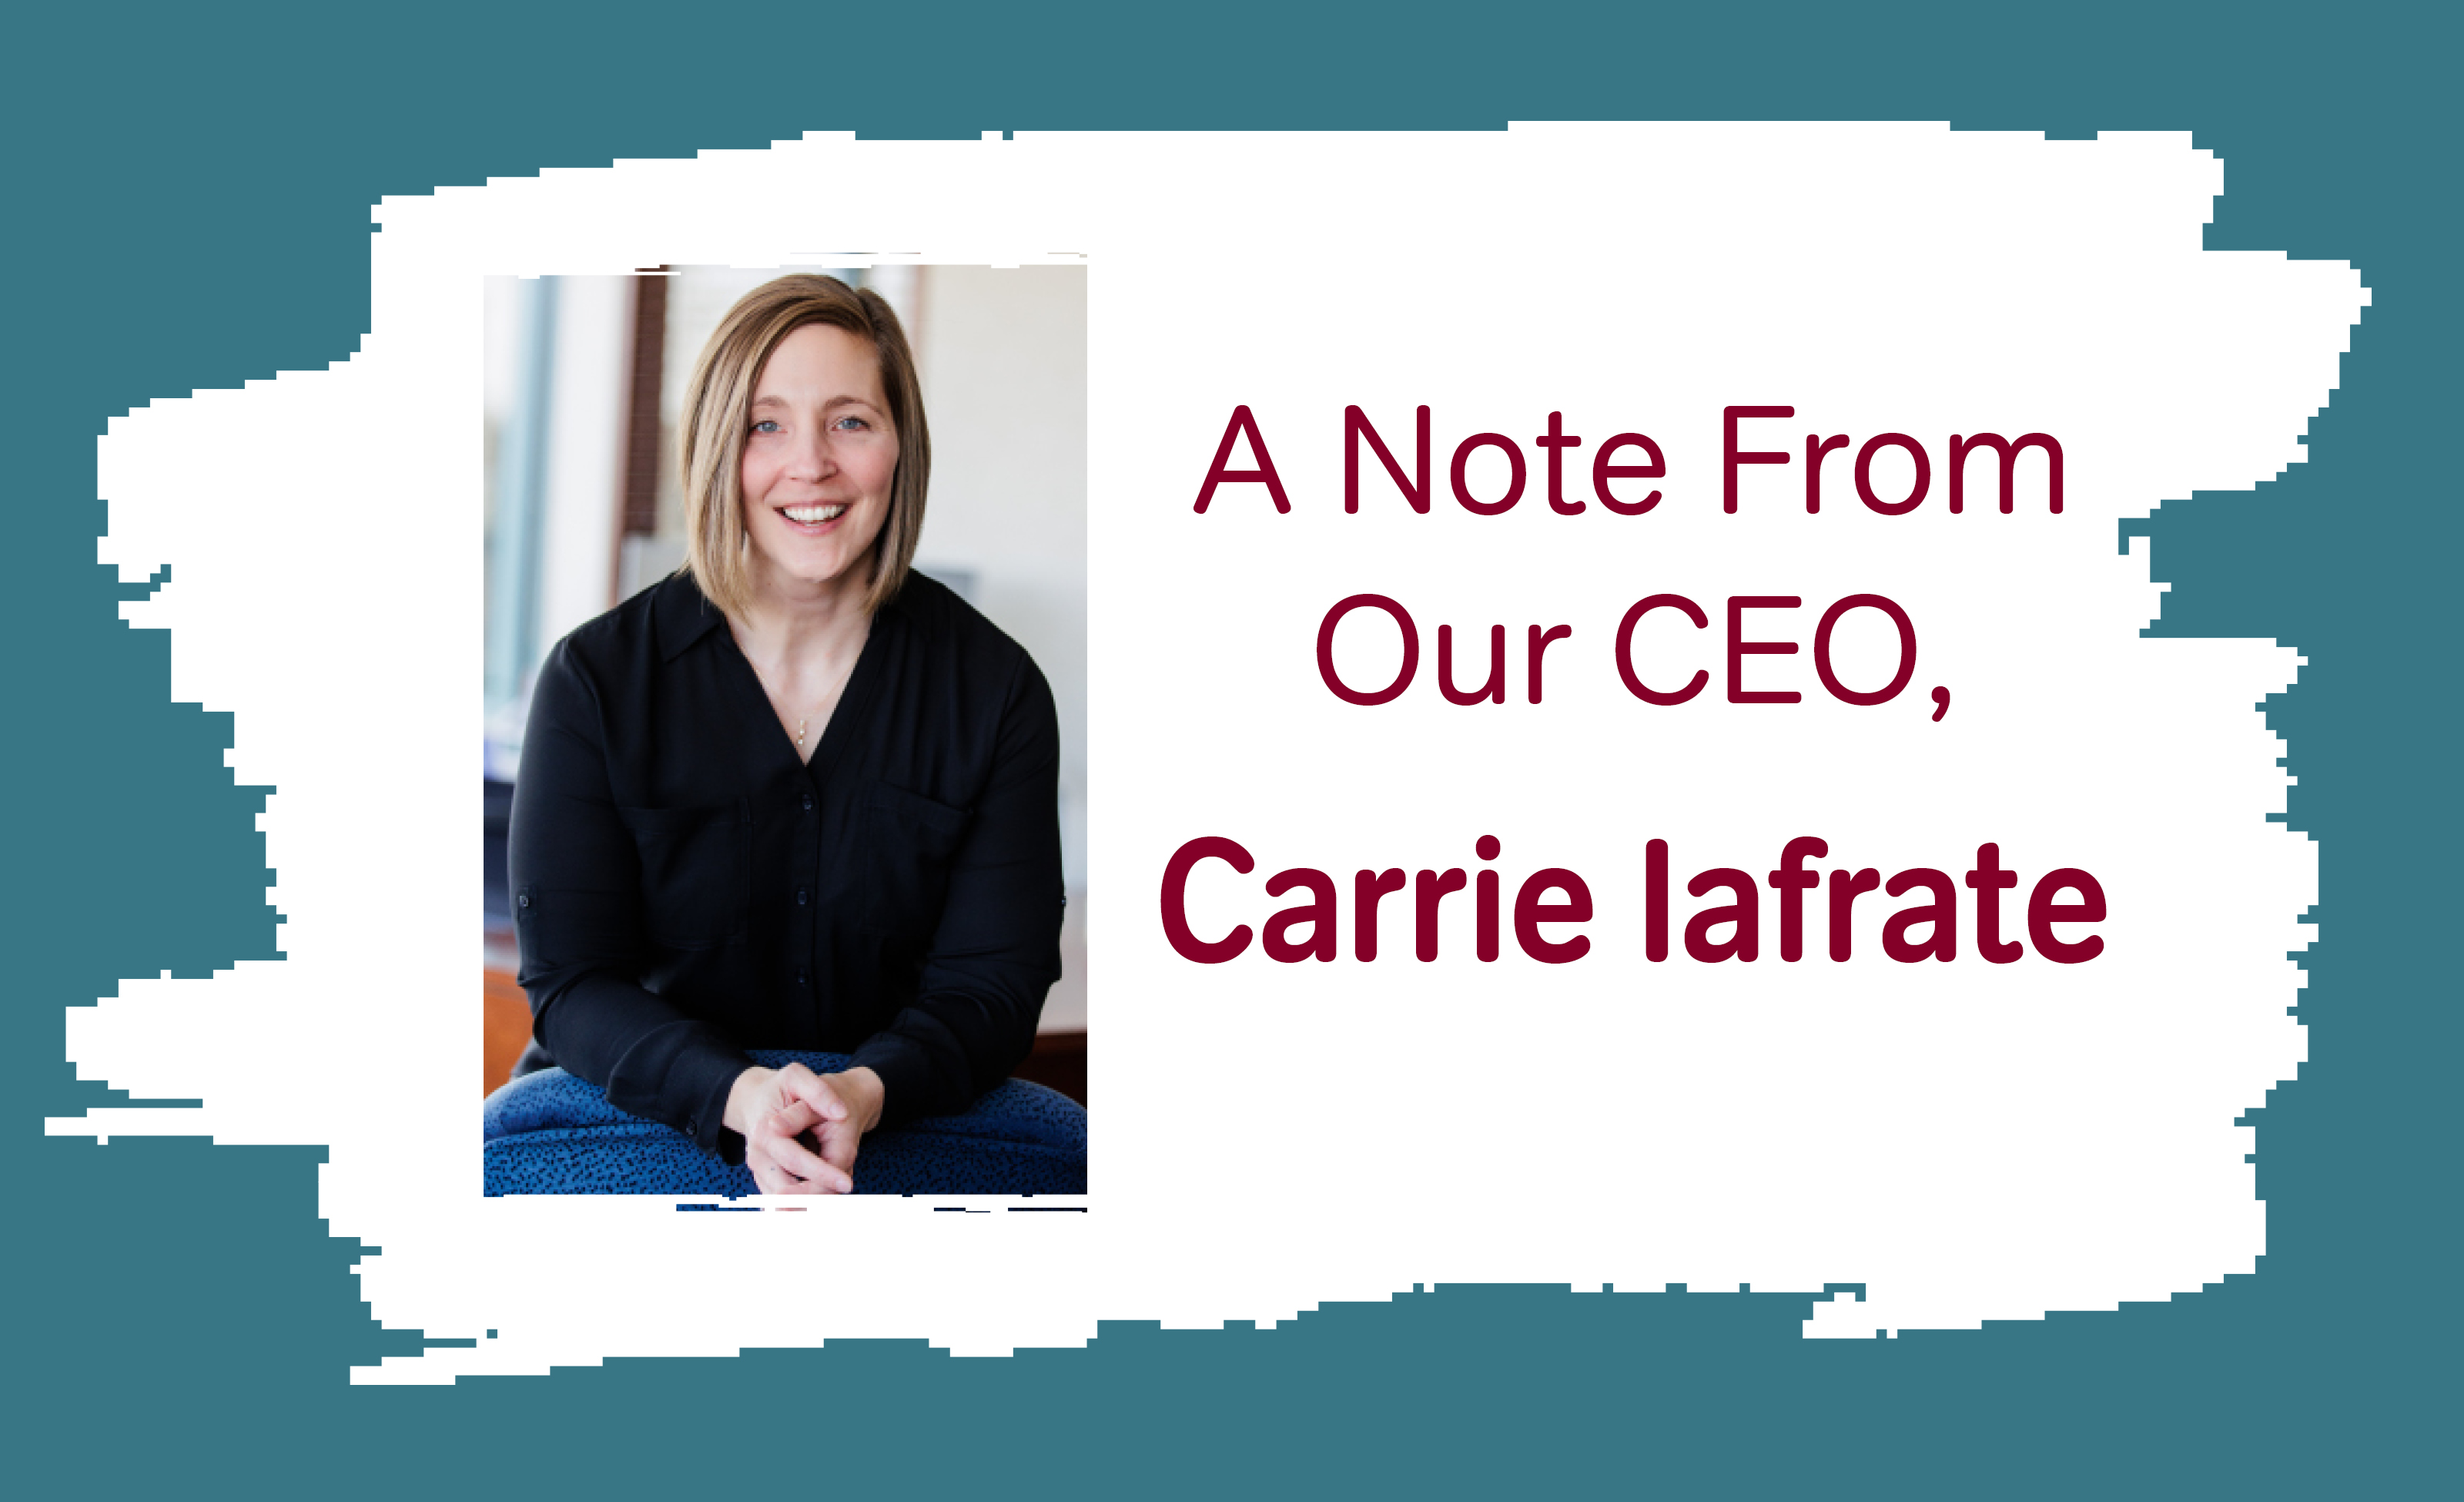 A Note From Our CEO, Carrie Iafrate